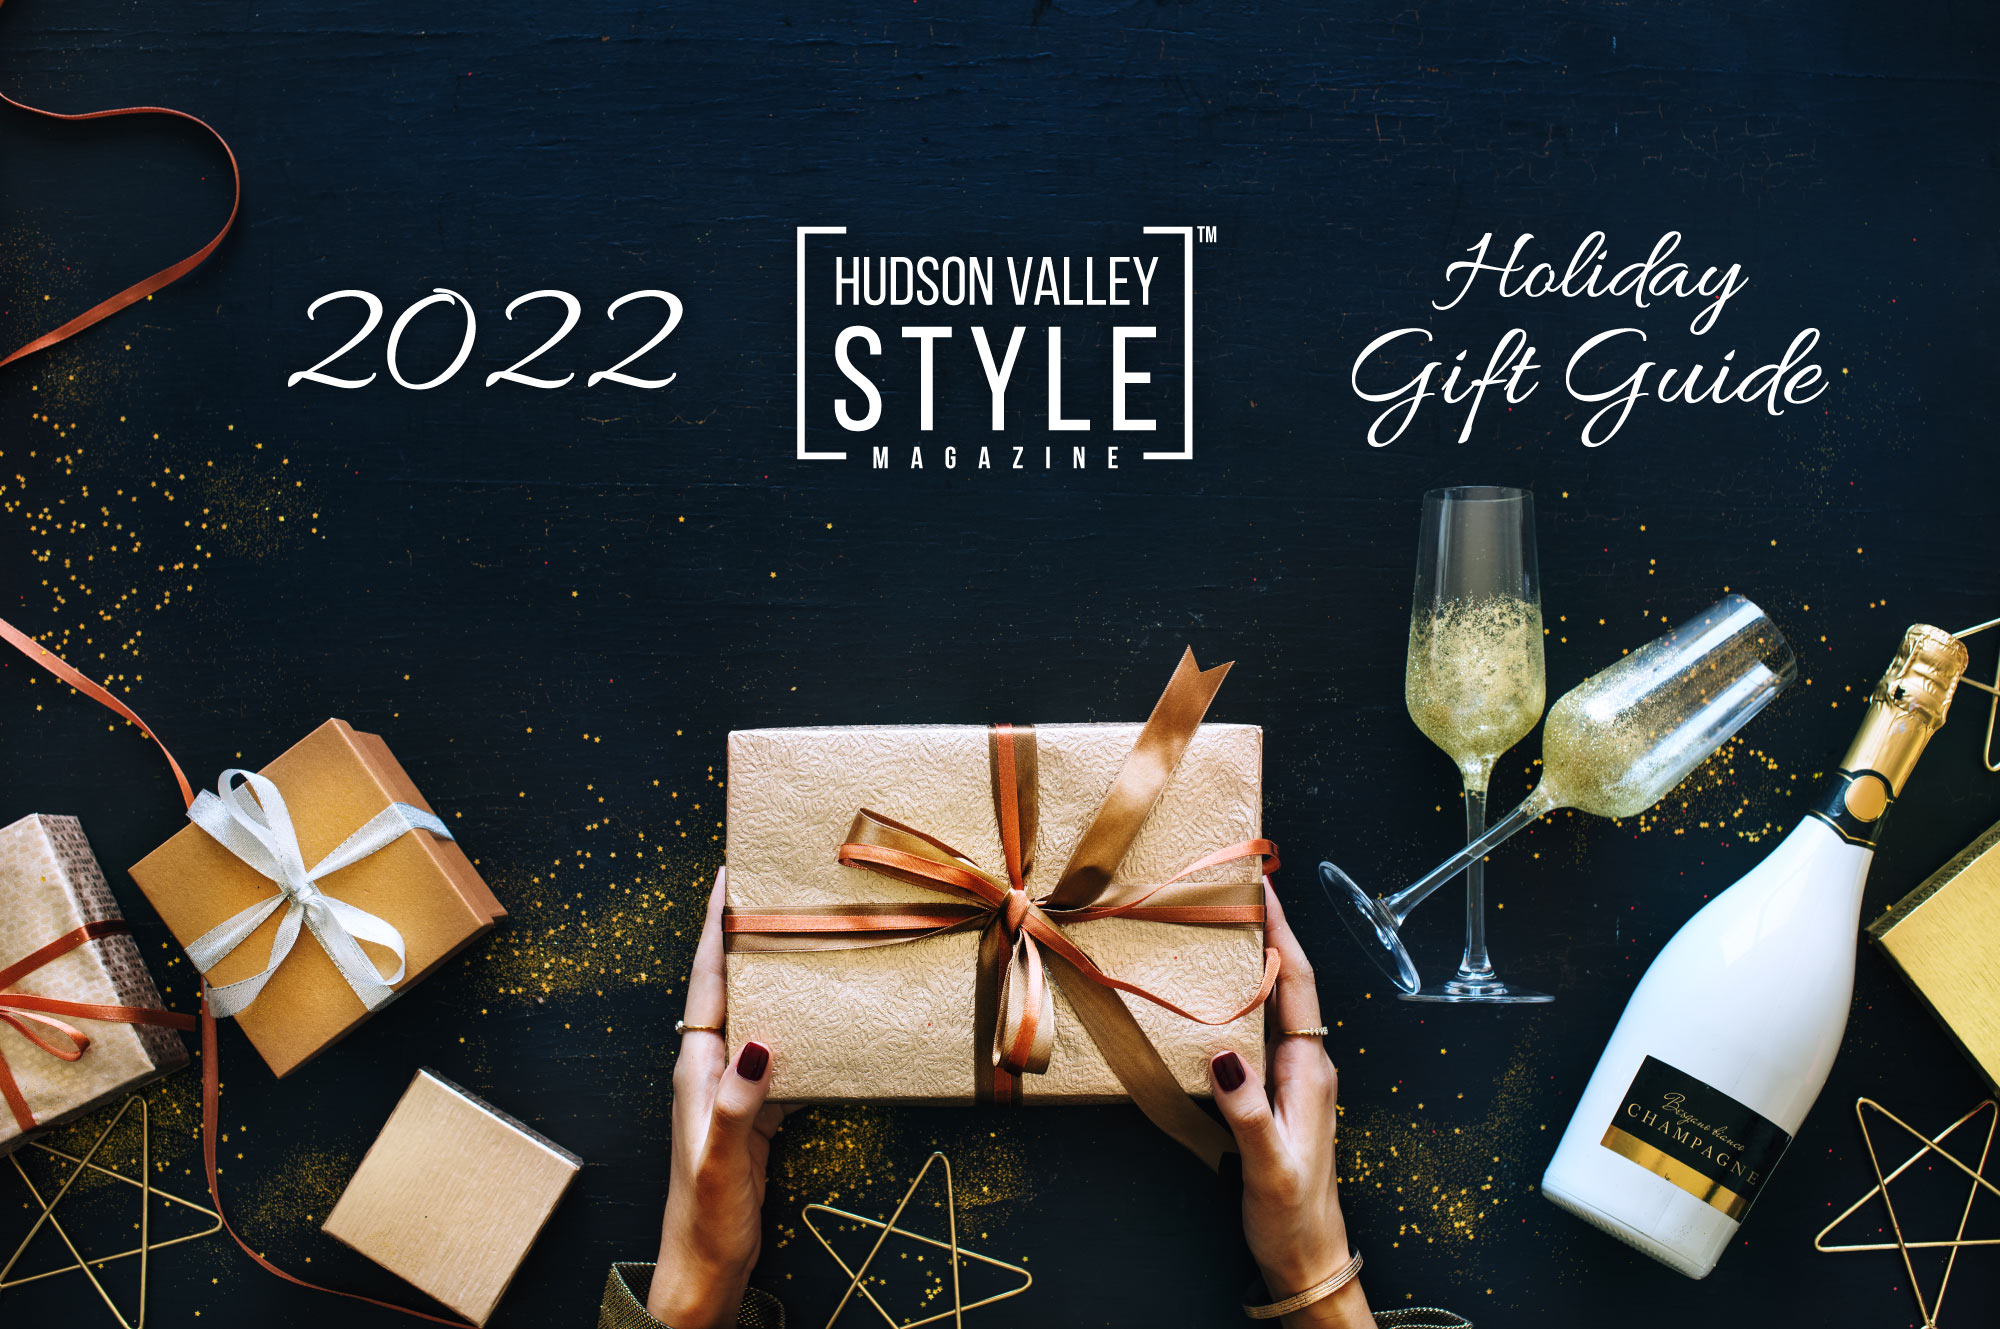 3 Reasons to Promote Your Business in the Hudson Valley Style Magazine's 2022 Holiday Gift Guide